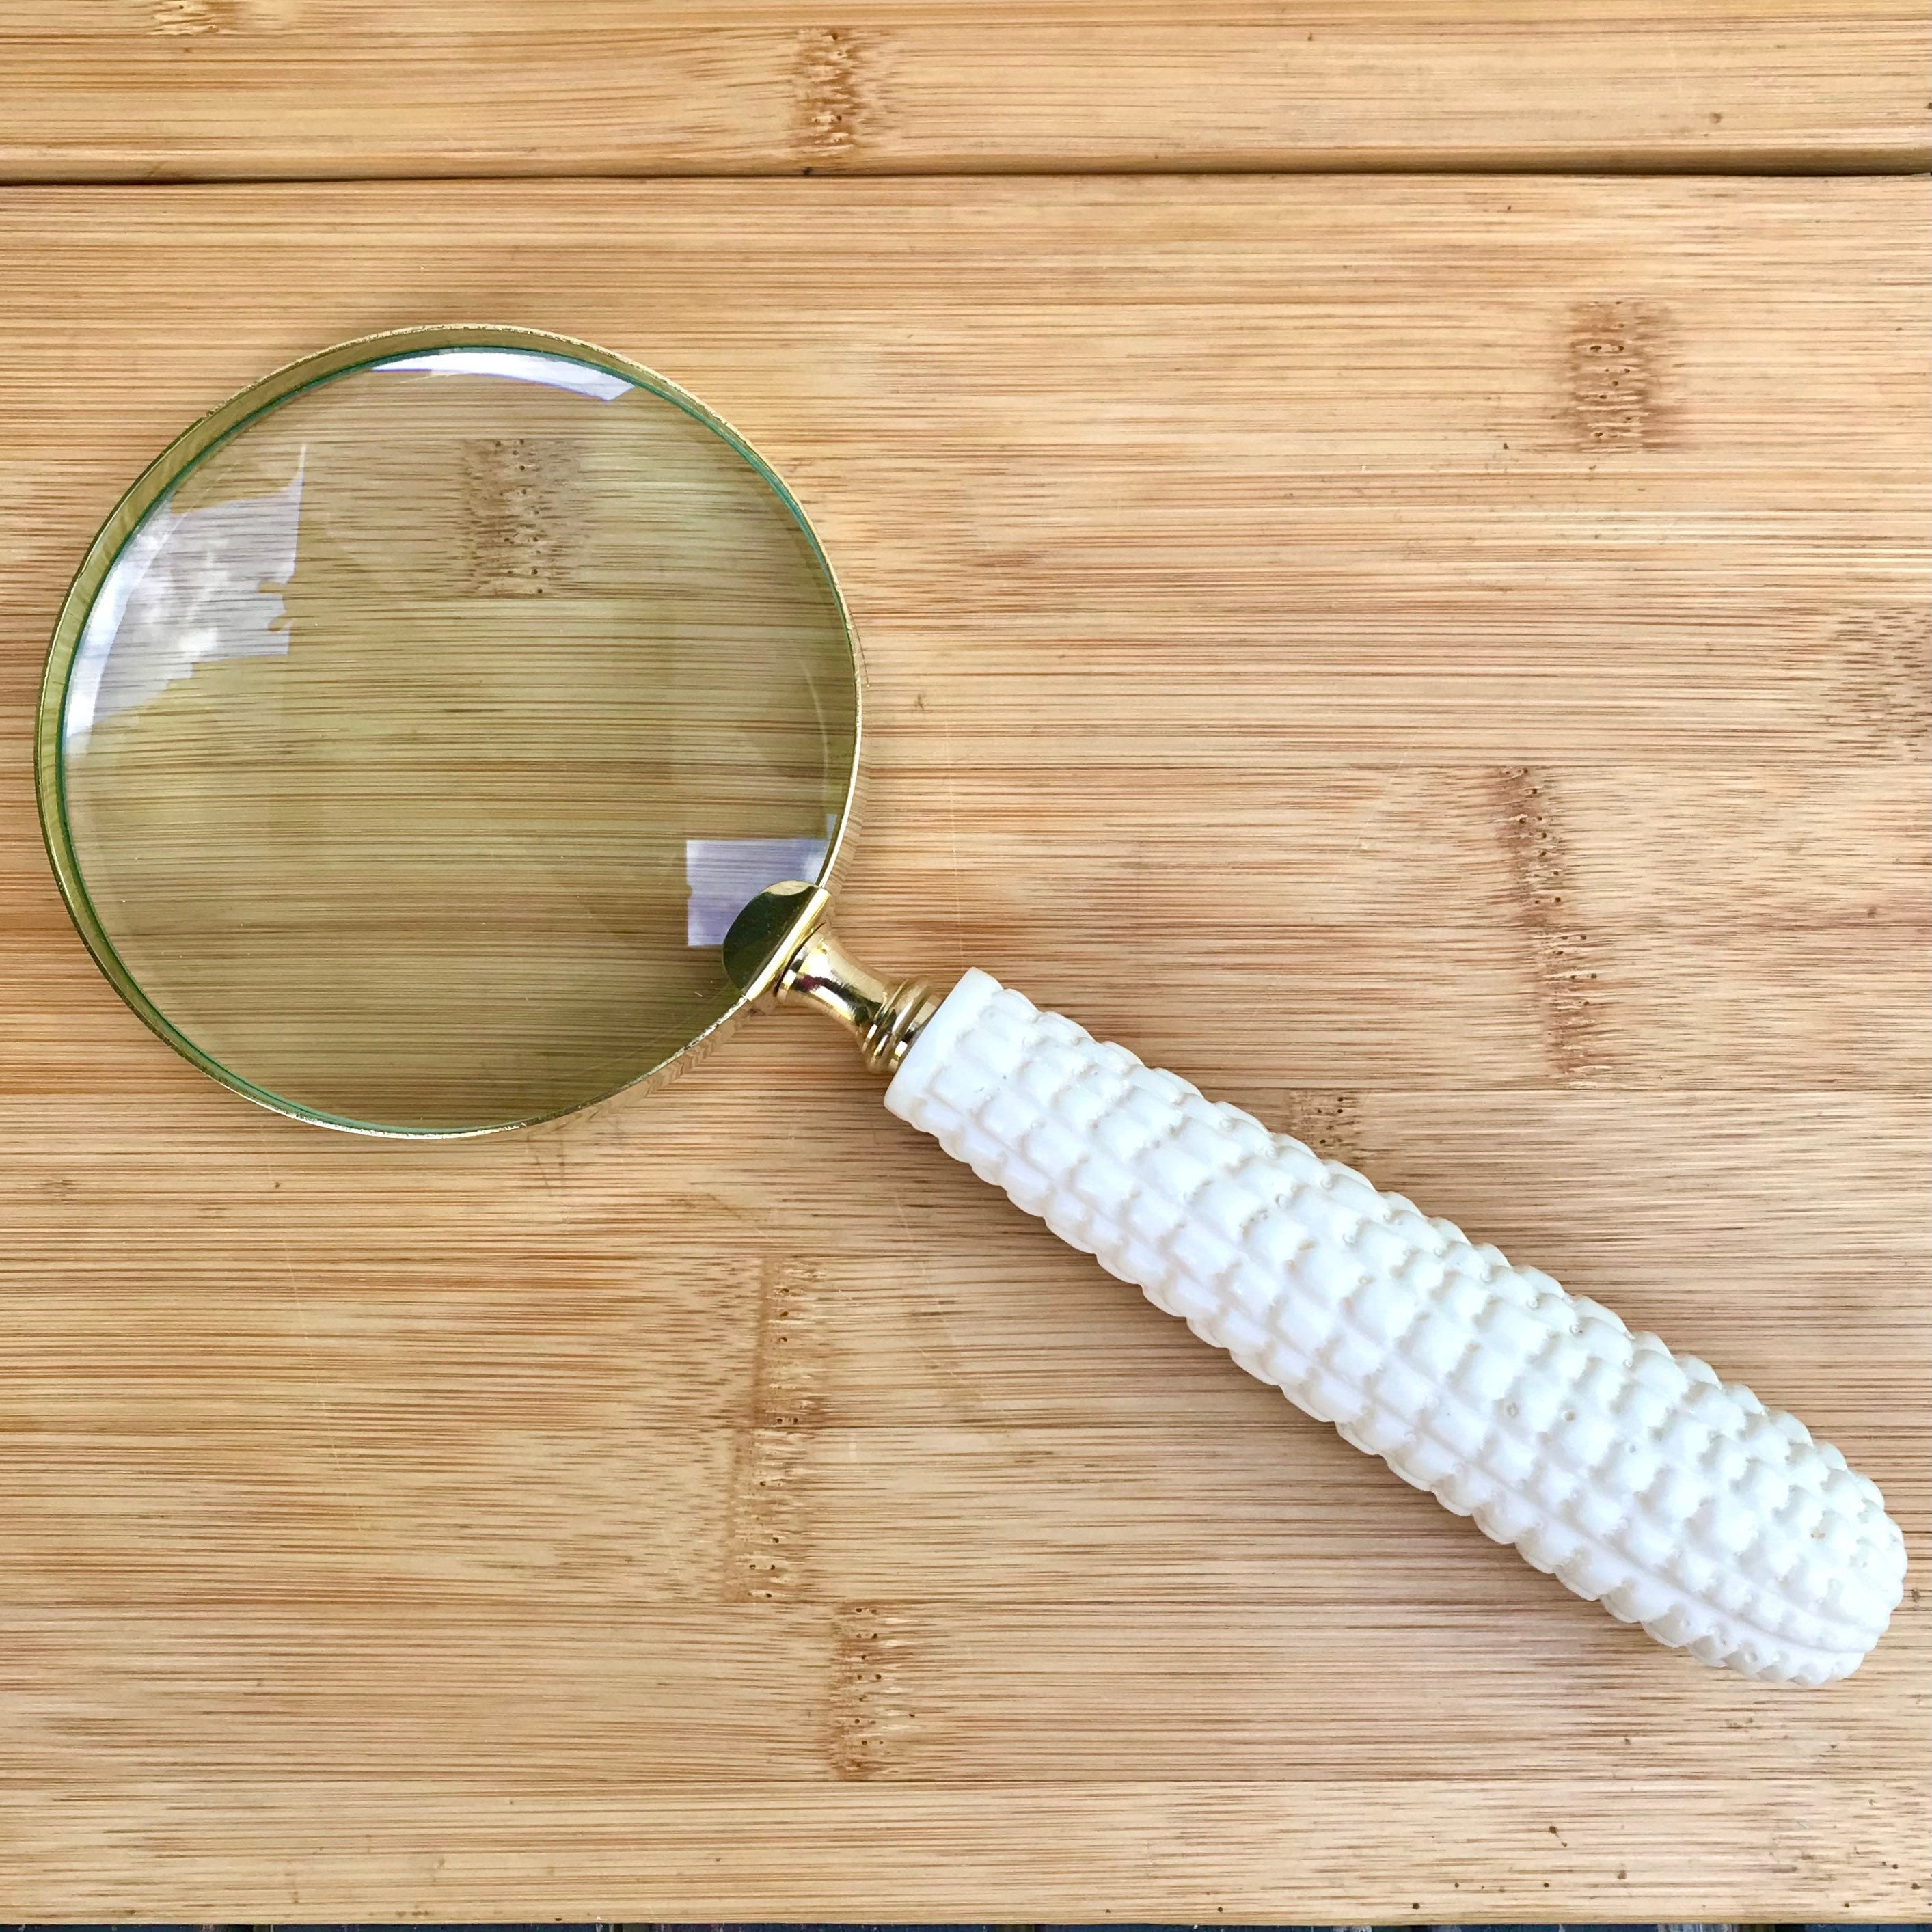 Large Magnifying Glass With a Spiral Twist Handle & Sterling Silver Rim 